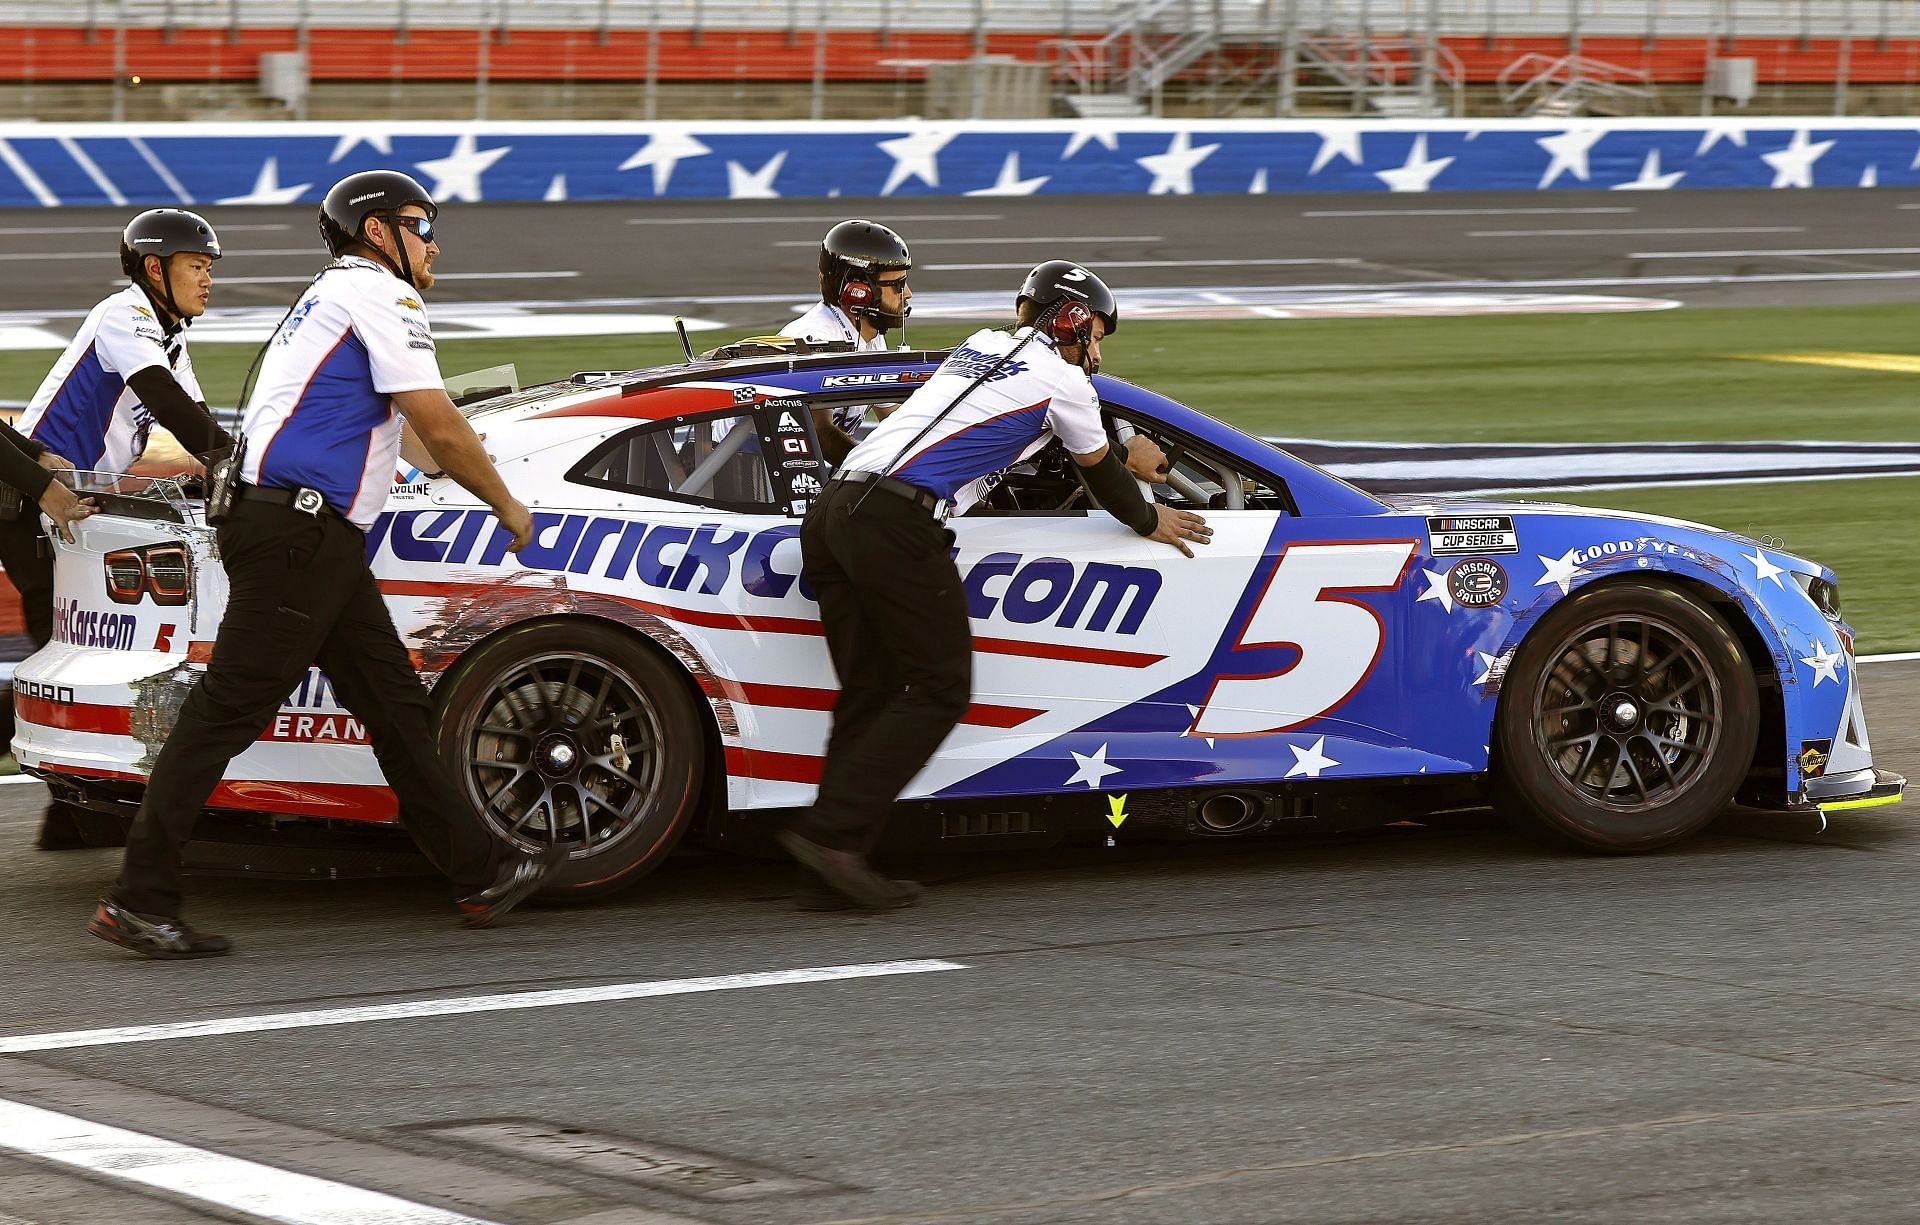 Crew members push the damaged #5 Chevrolet driven by Kyle Larson to the garage area during practice for the 2022 NASCAR Cup Series Coca-Cola 600 at Charlotte Motor Speedway in Concord, North Carolina. (Photo by Buda Mendes/Getty Images)